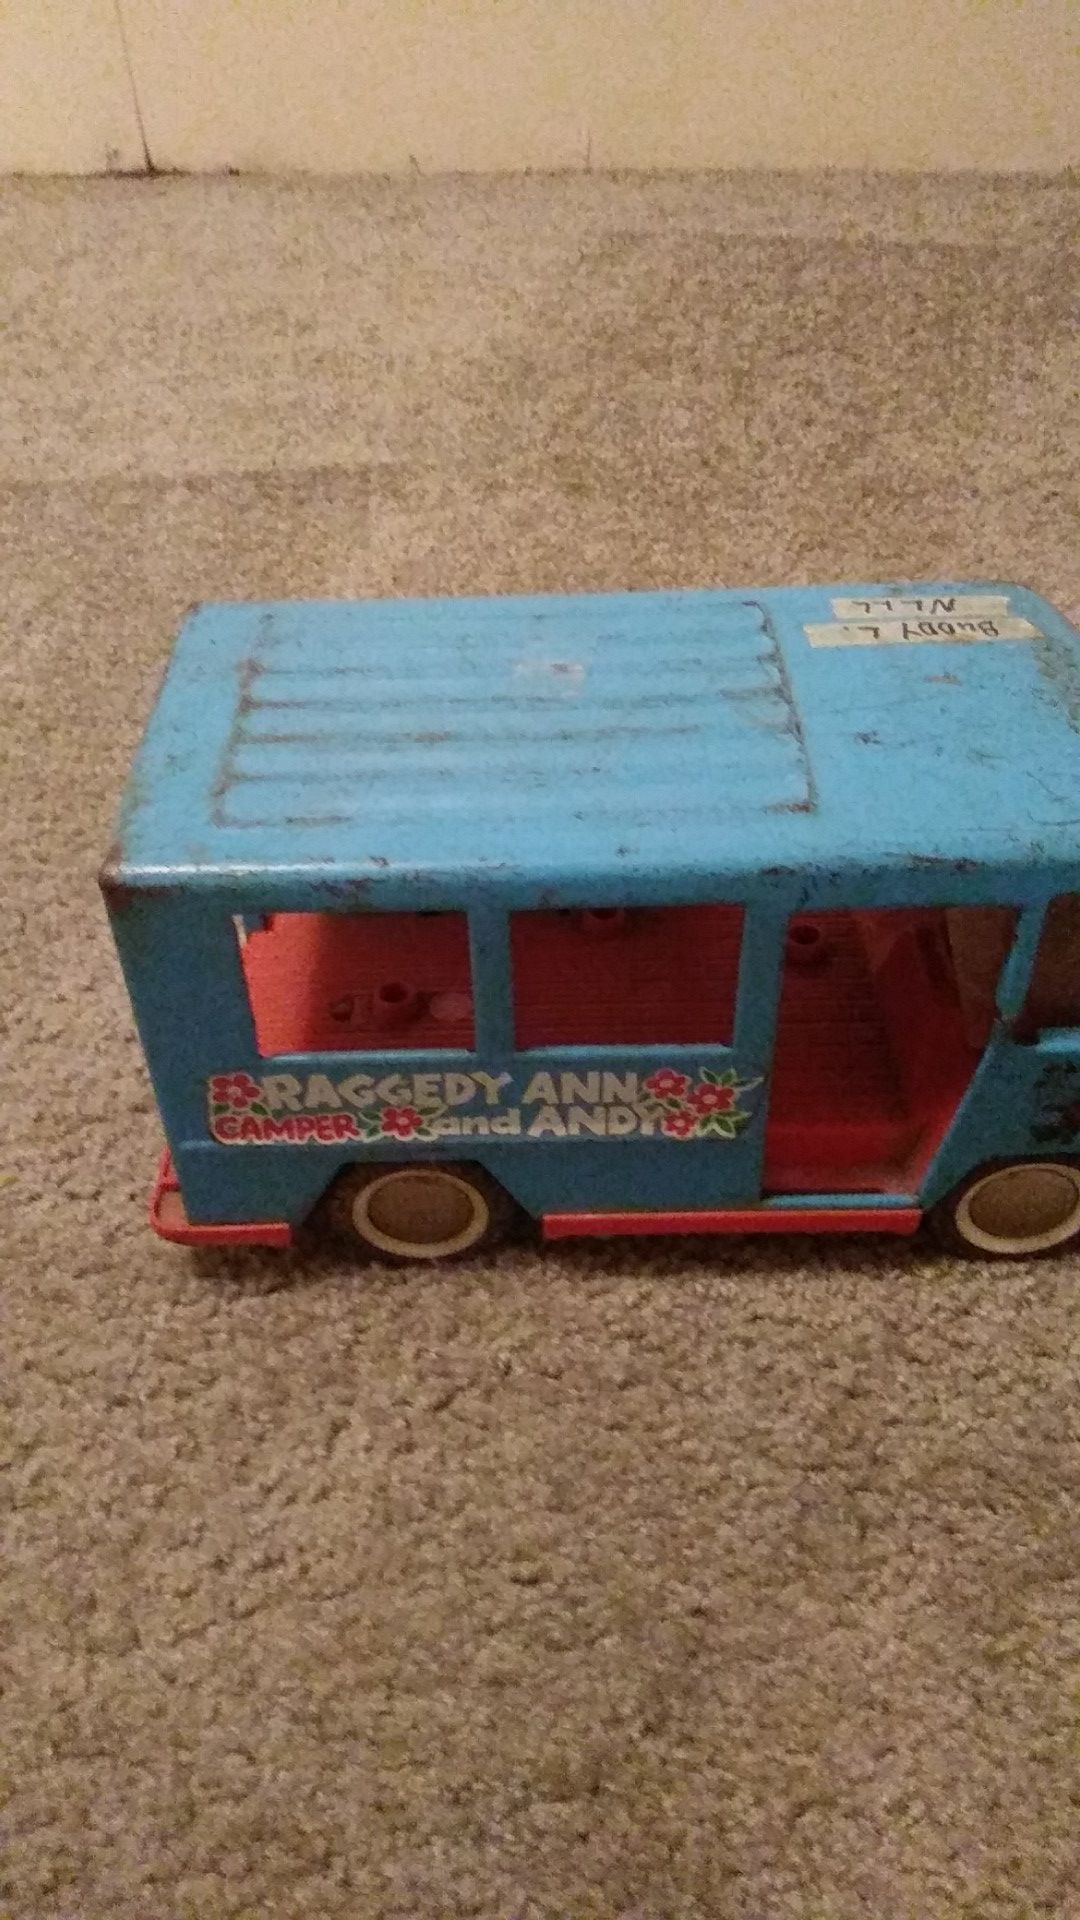 Raggedy ann and andy buddy l bus